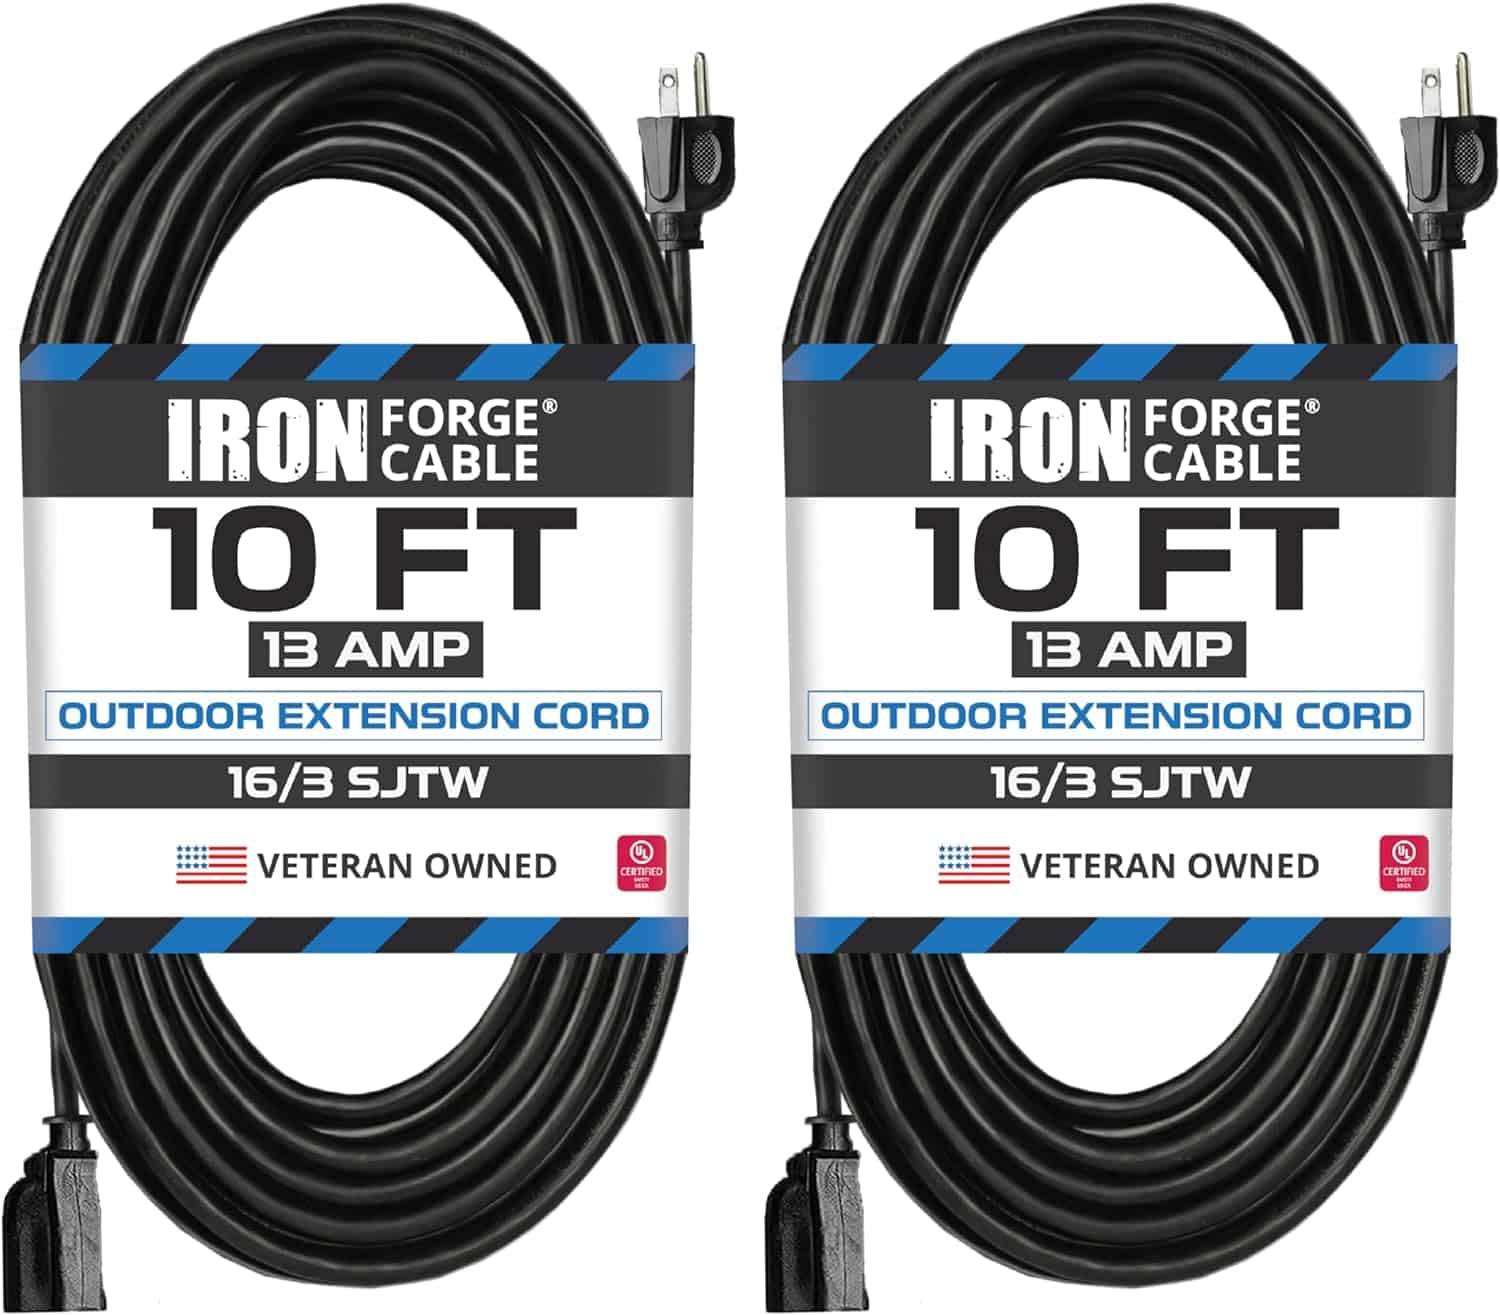 Iron Forge Cable Black Extension Cord 10 Ft, 2 Pack, 16 3 Outdoor Extension Cord 3 Prong 13 AMP, SJTW Weatherproof Exterior Power Cable 10 Foot Great for Outdoor Lights Decoration Leaf Blower 1